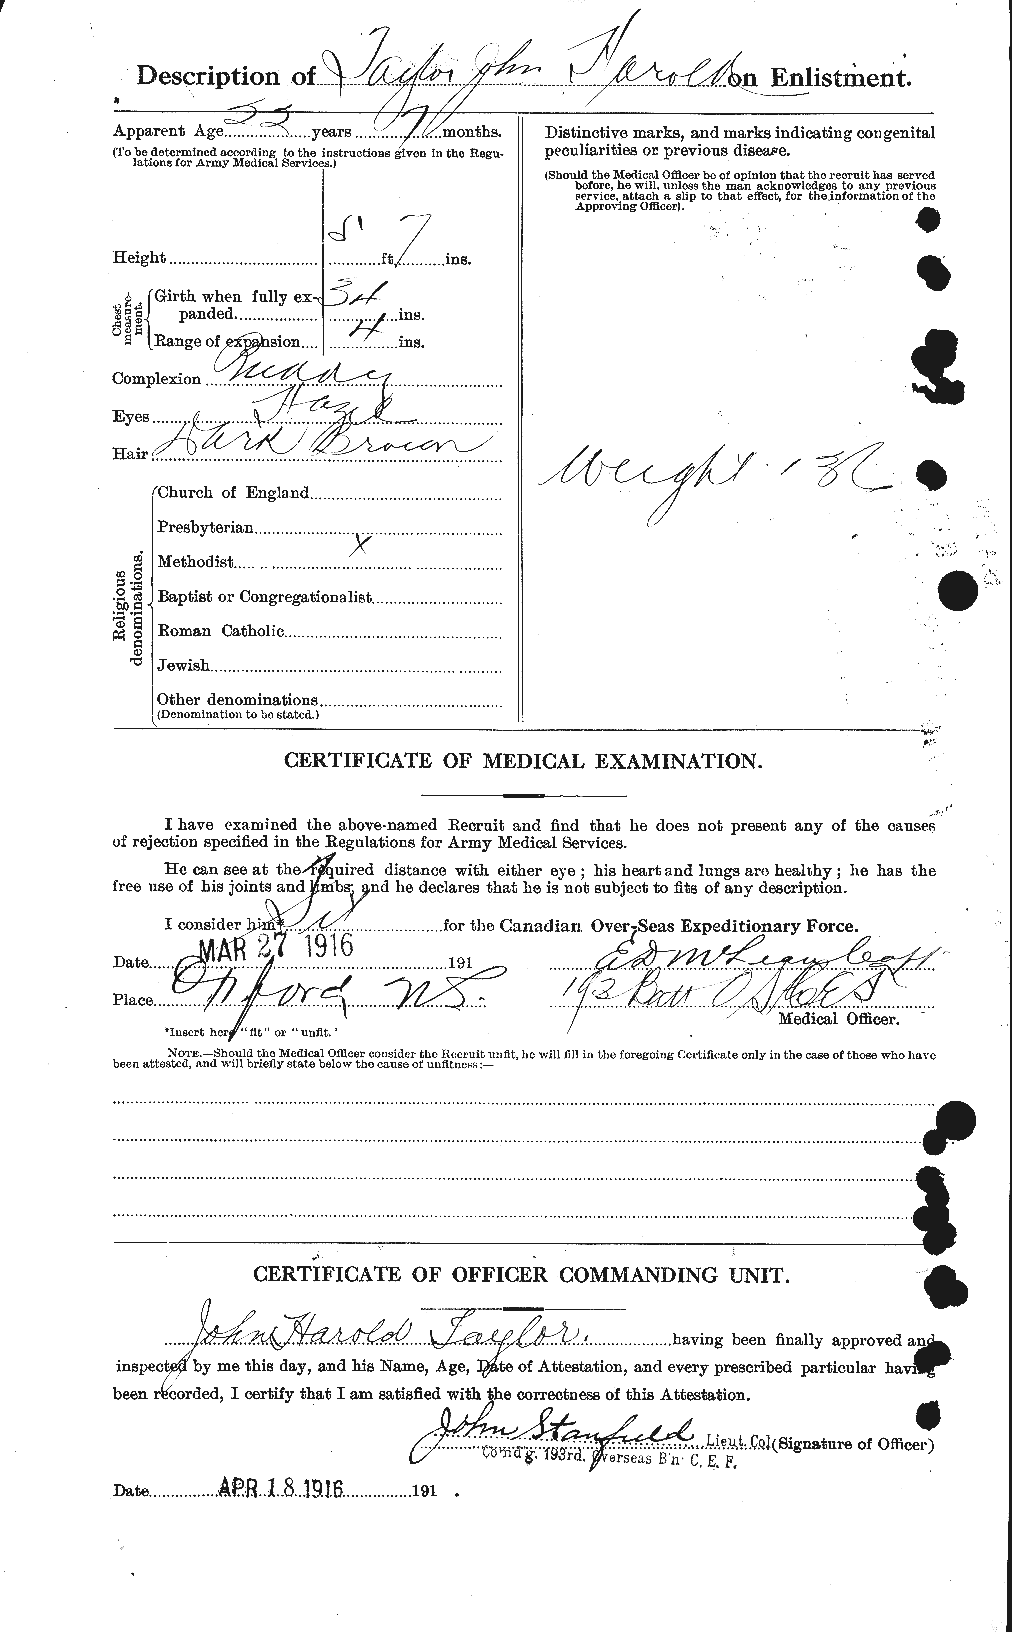 Personnel Records of the First World War - CEF 627105b